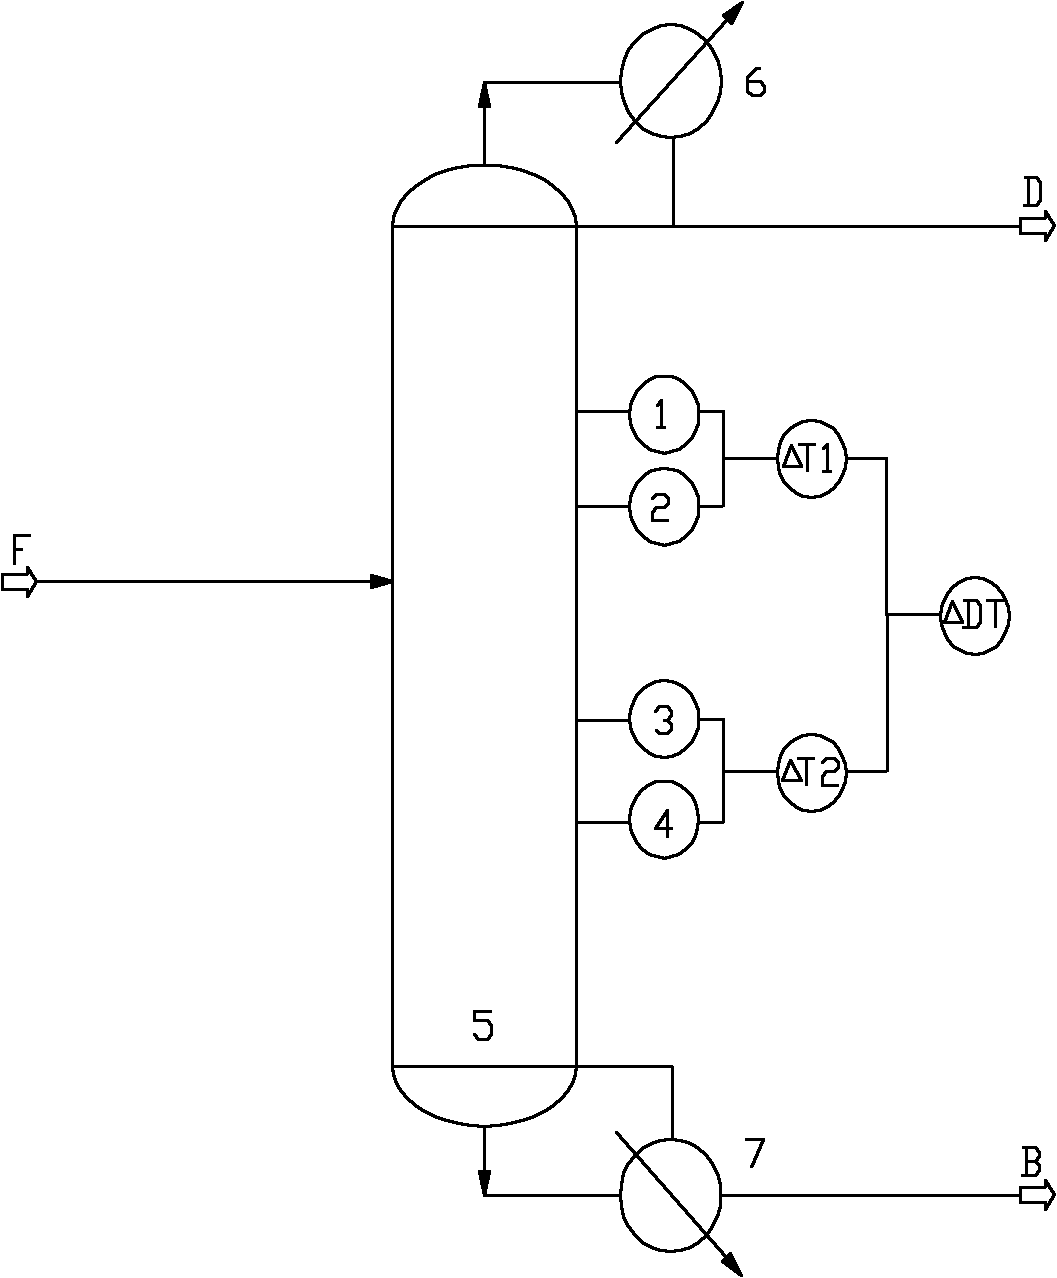 Control method for stably adjusting purity of trichlorosilane